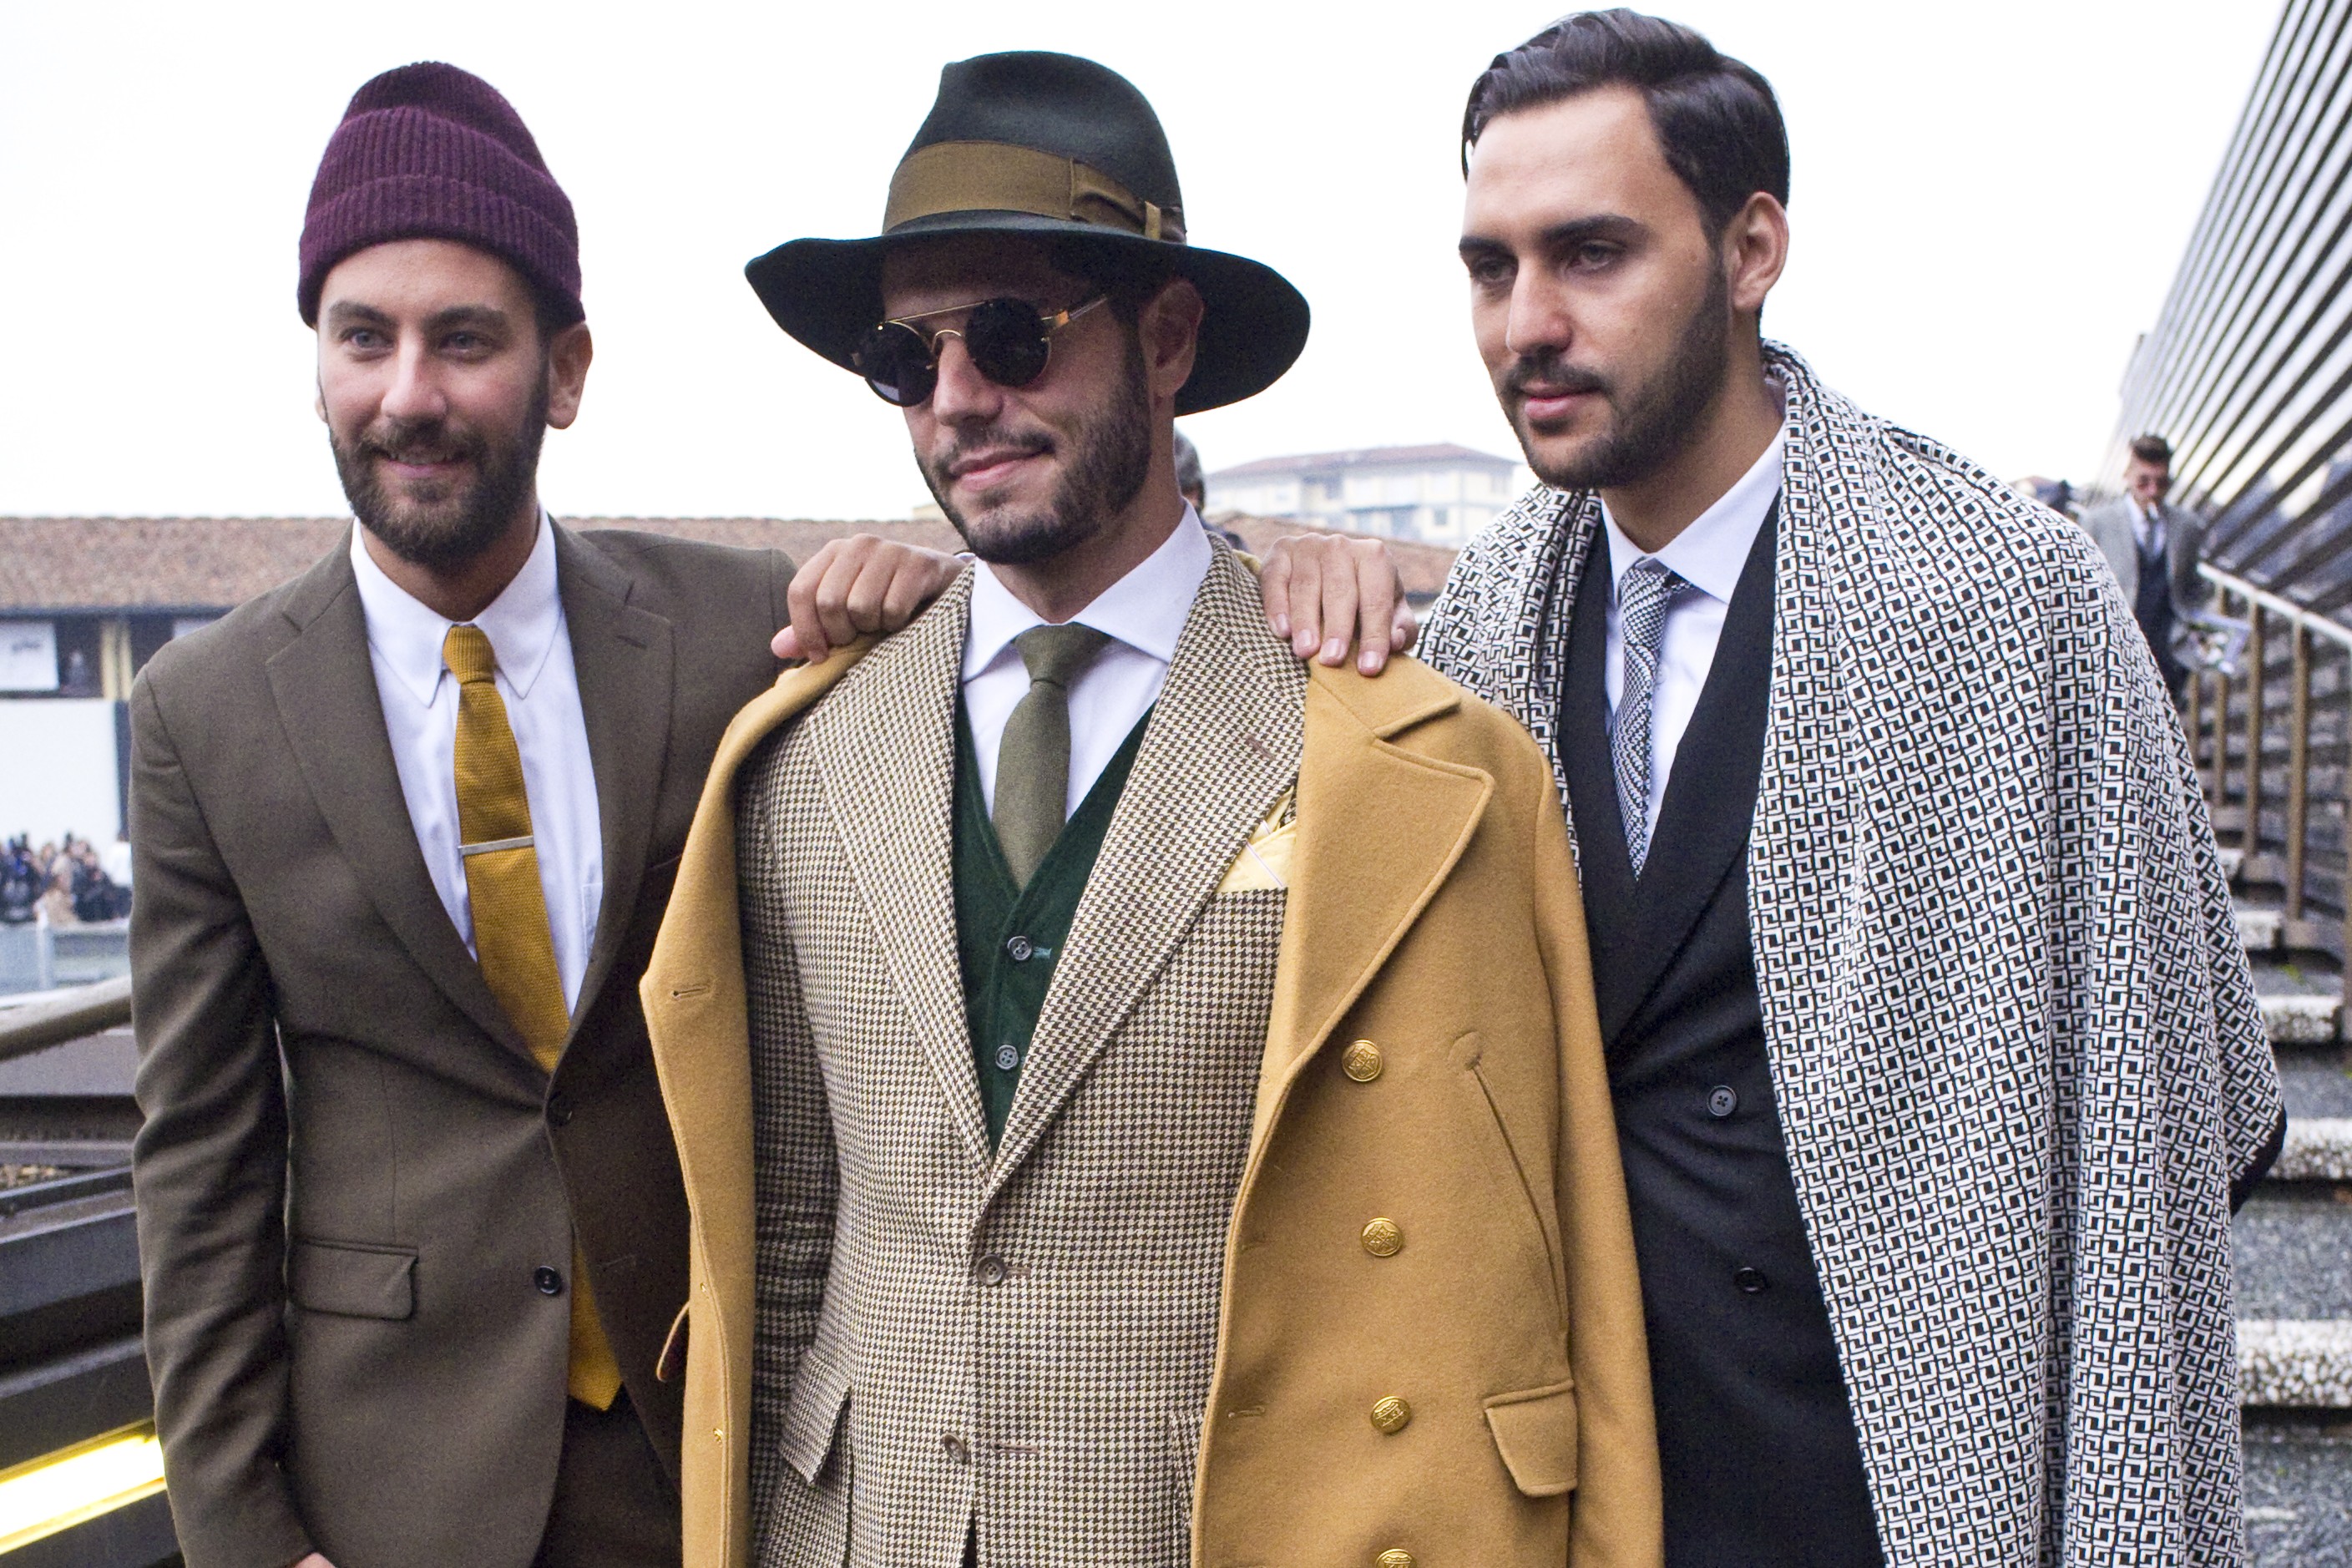 Pitti Uomo 87 in pictures | Page 2 | Styleforum